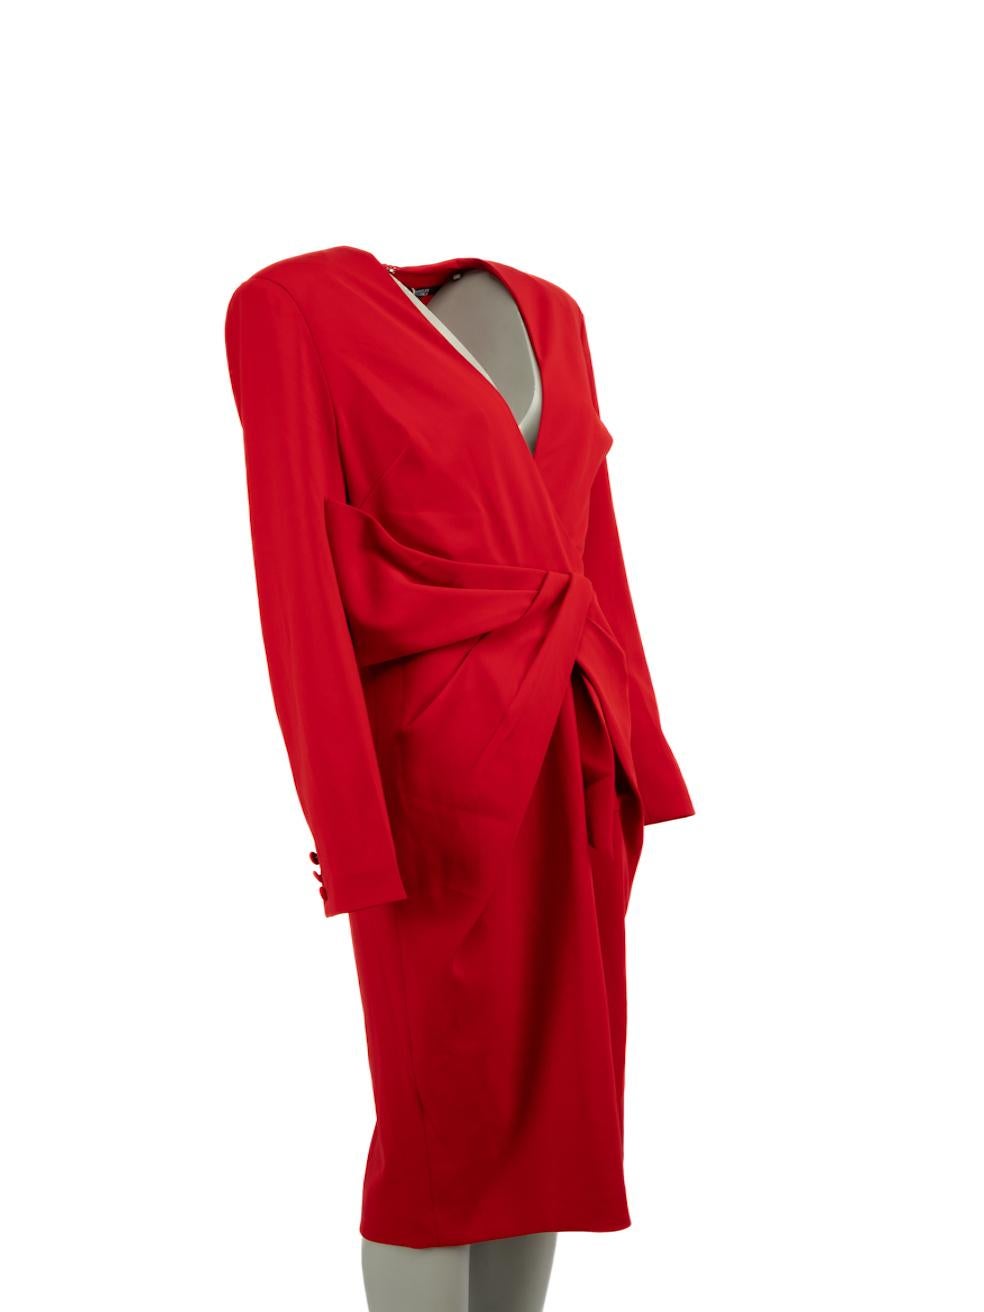 CONDITION is Never worn, with tags. No visible wear to dress is evident on this new Badgley Mischka designer resale item.
 
 
 
 Details
 
 
 Red
 
 Polyester
 
 Dress
 
 Long sleeves
 
 Plunge neck
 
 Knee length
 
 Shoulder pads
 
 Back zip and